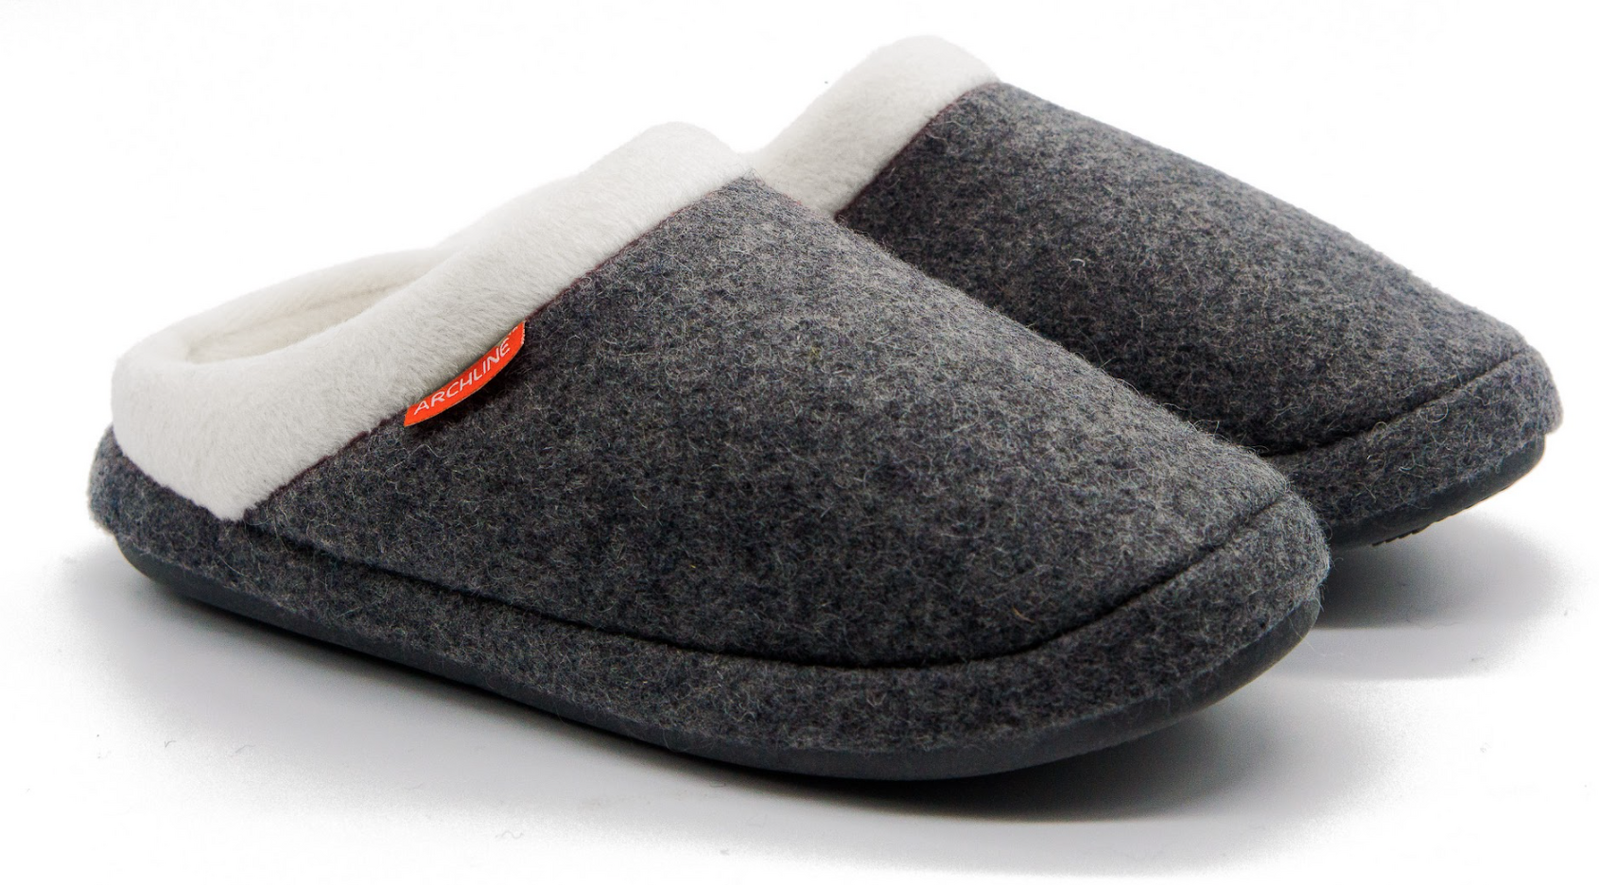 Orthotic Slippers Slip On Arch Scuffs Orthopedic Moccasins - Grey Marle - EUR 38